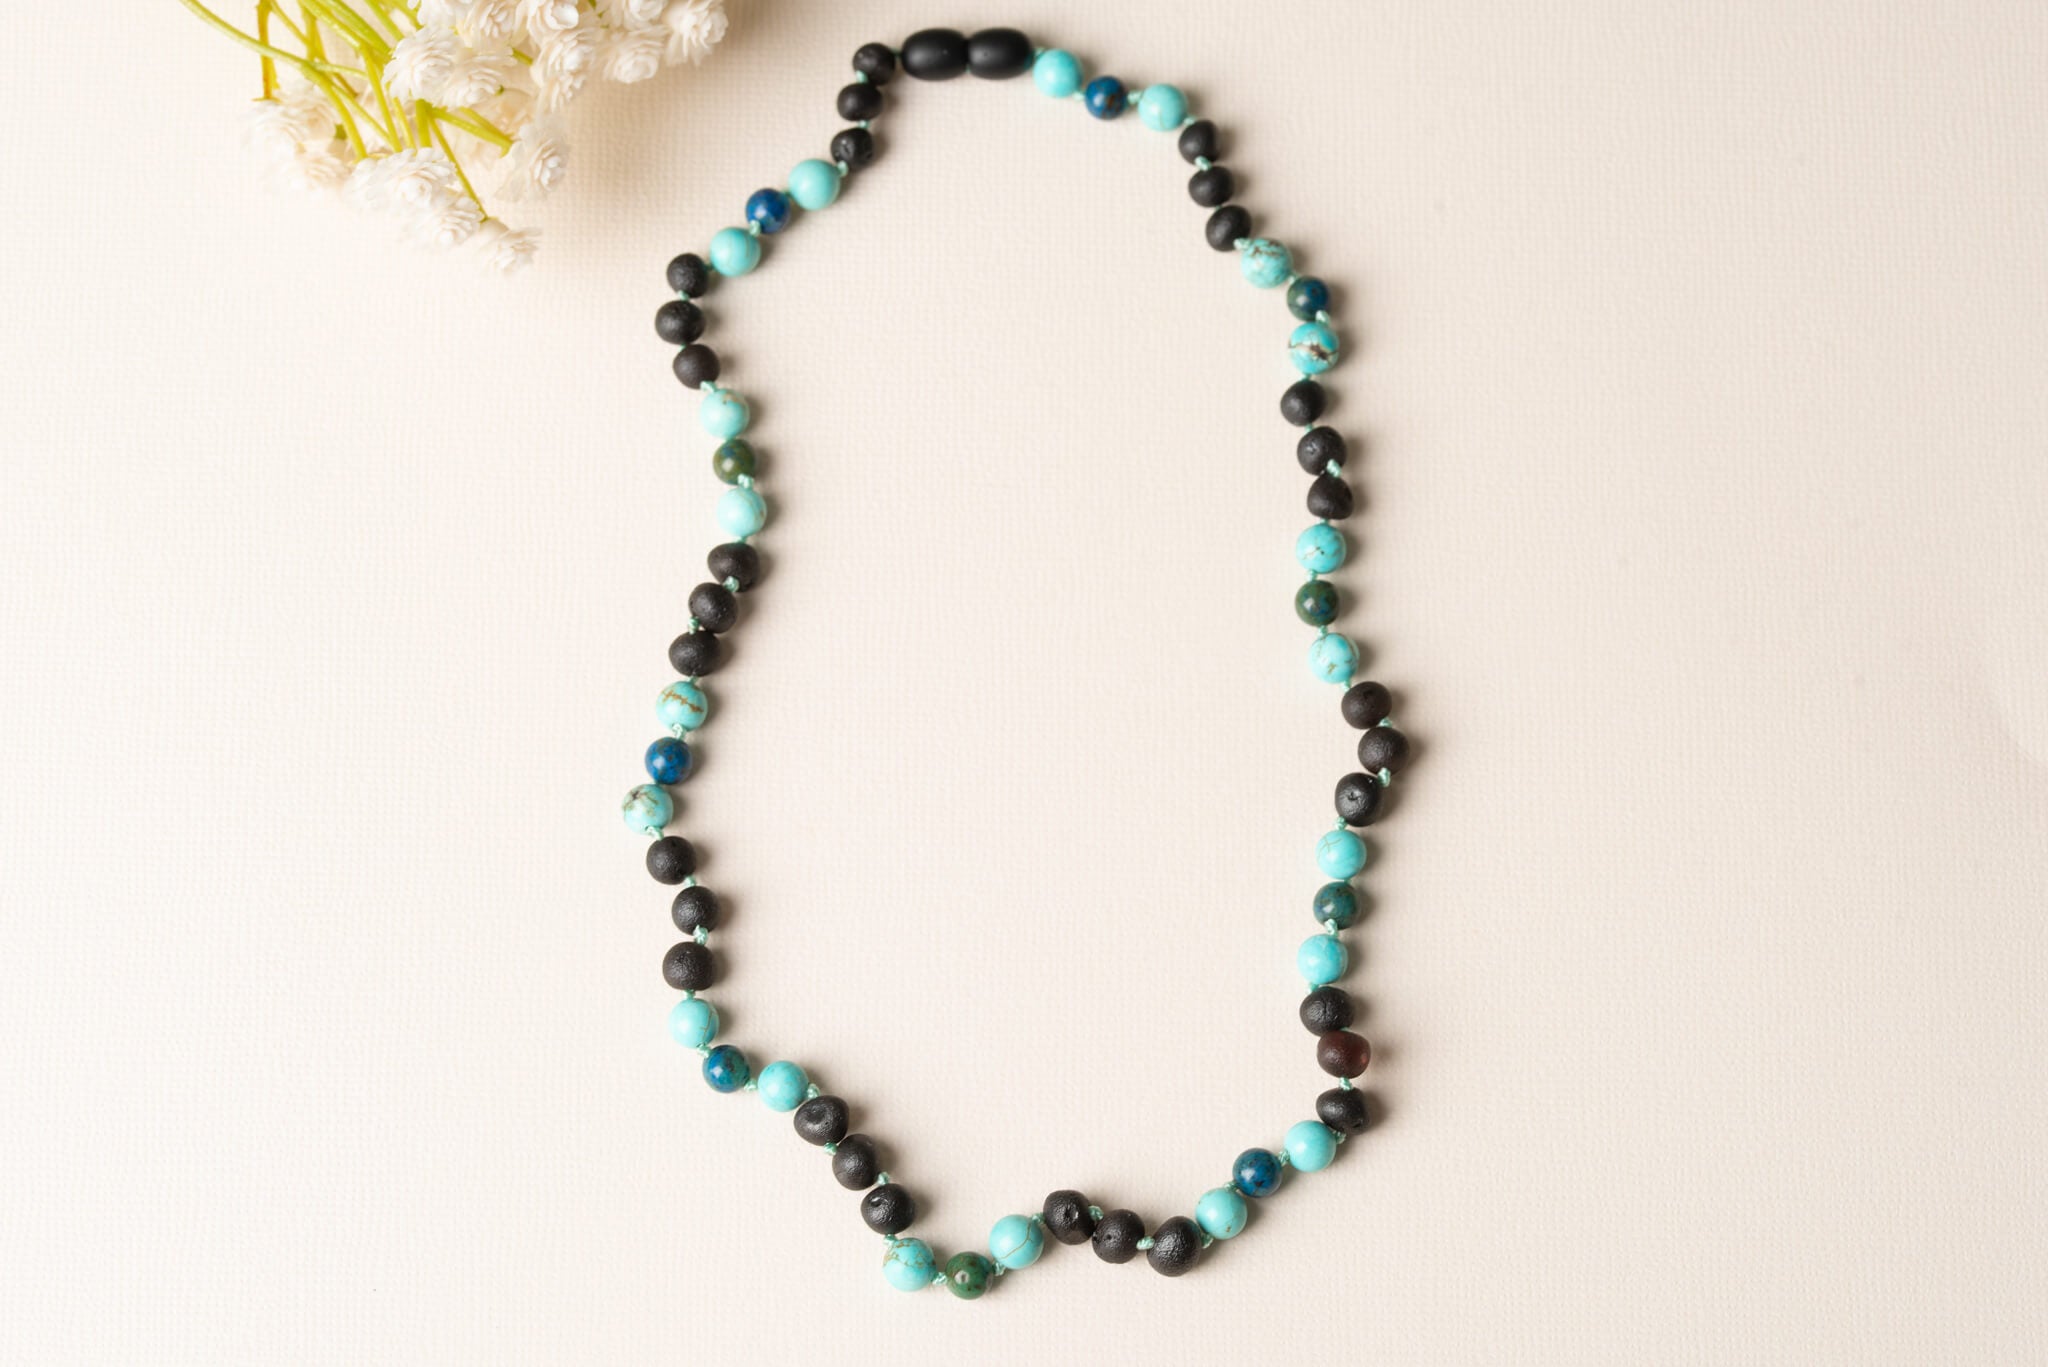 Do Amber Necklaces Work for Teething Pain? - ParentData